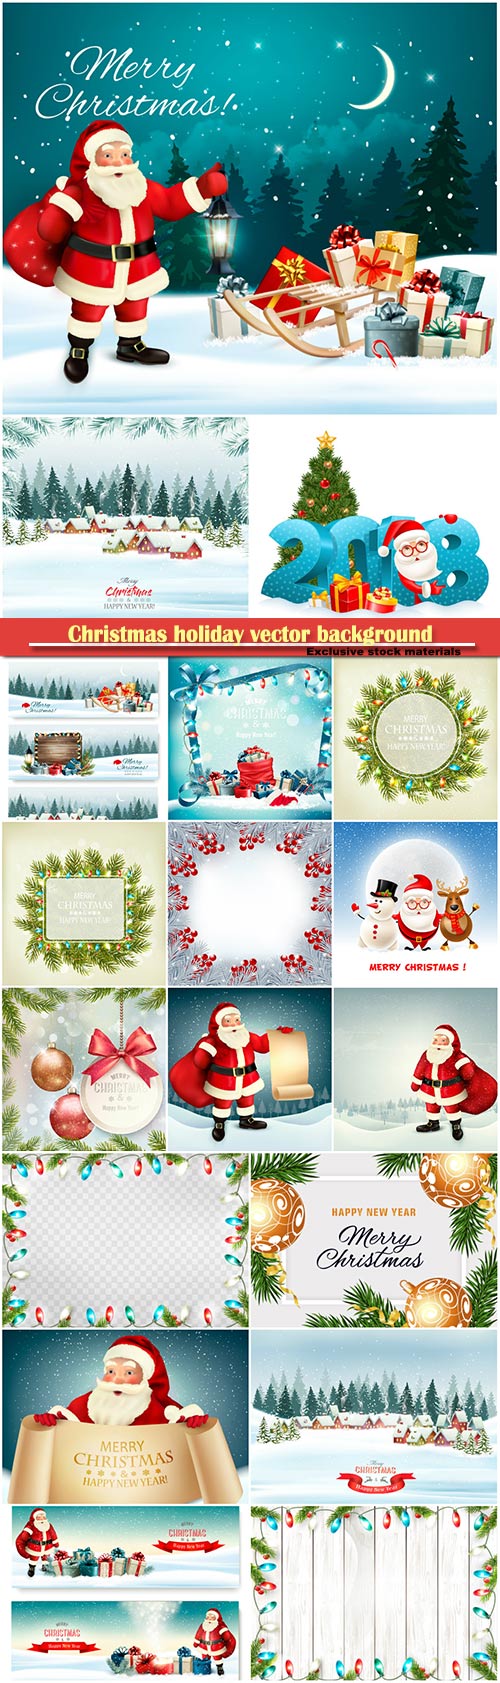 Christmas holiday vector background with Santa Claus and branches of tree a ...